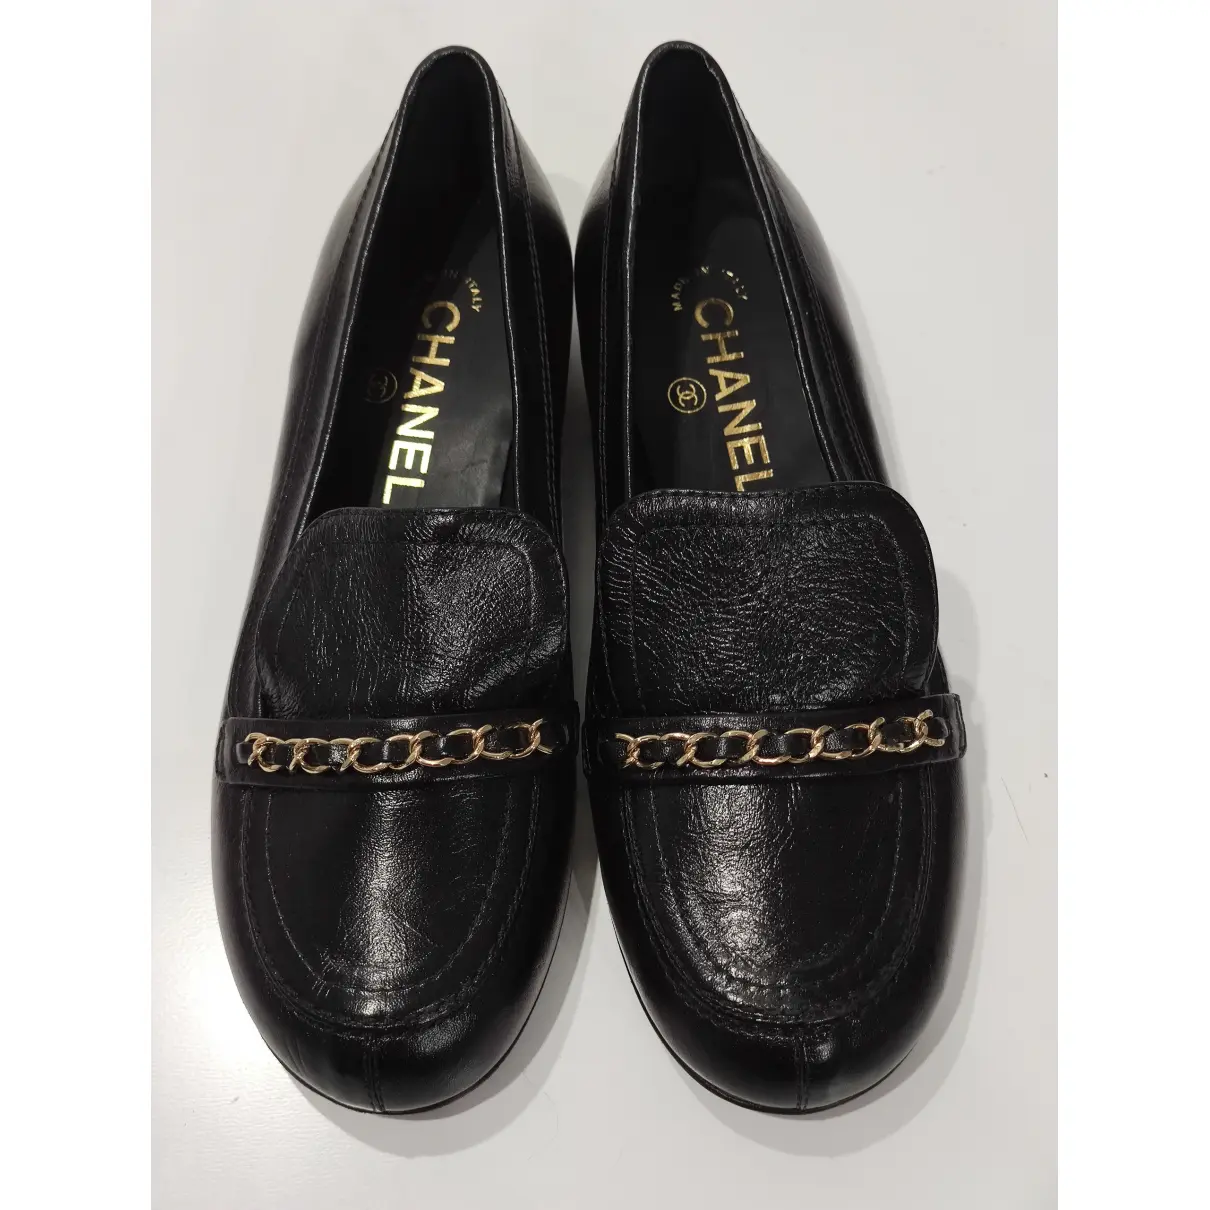 Buy Chanel Cambon leather flats online